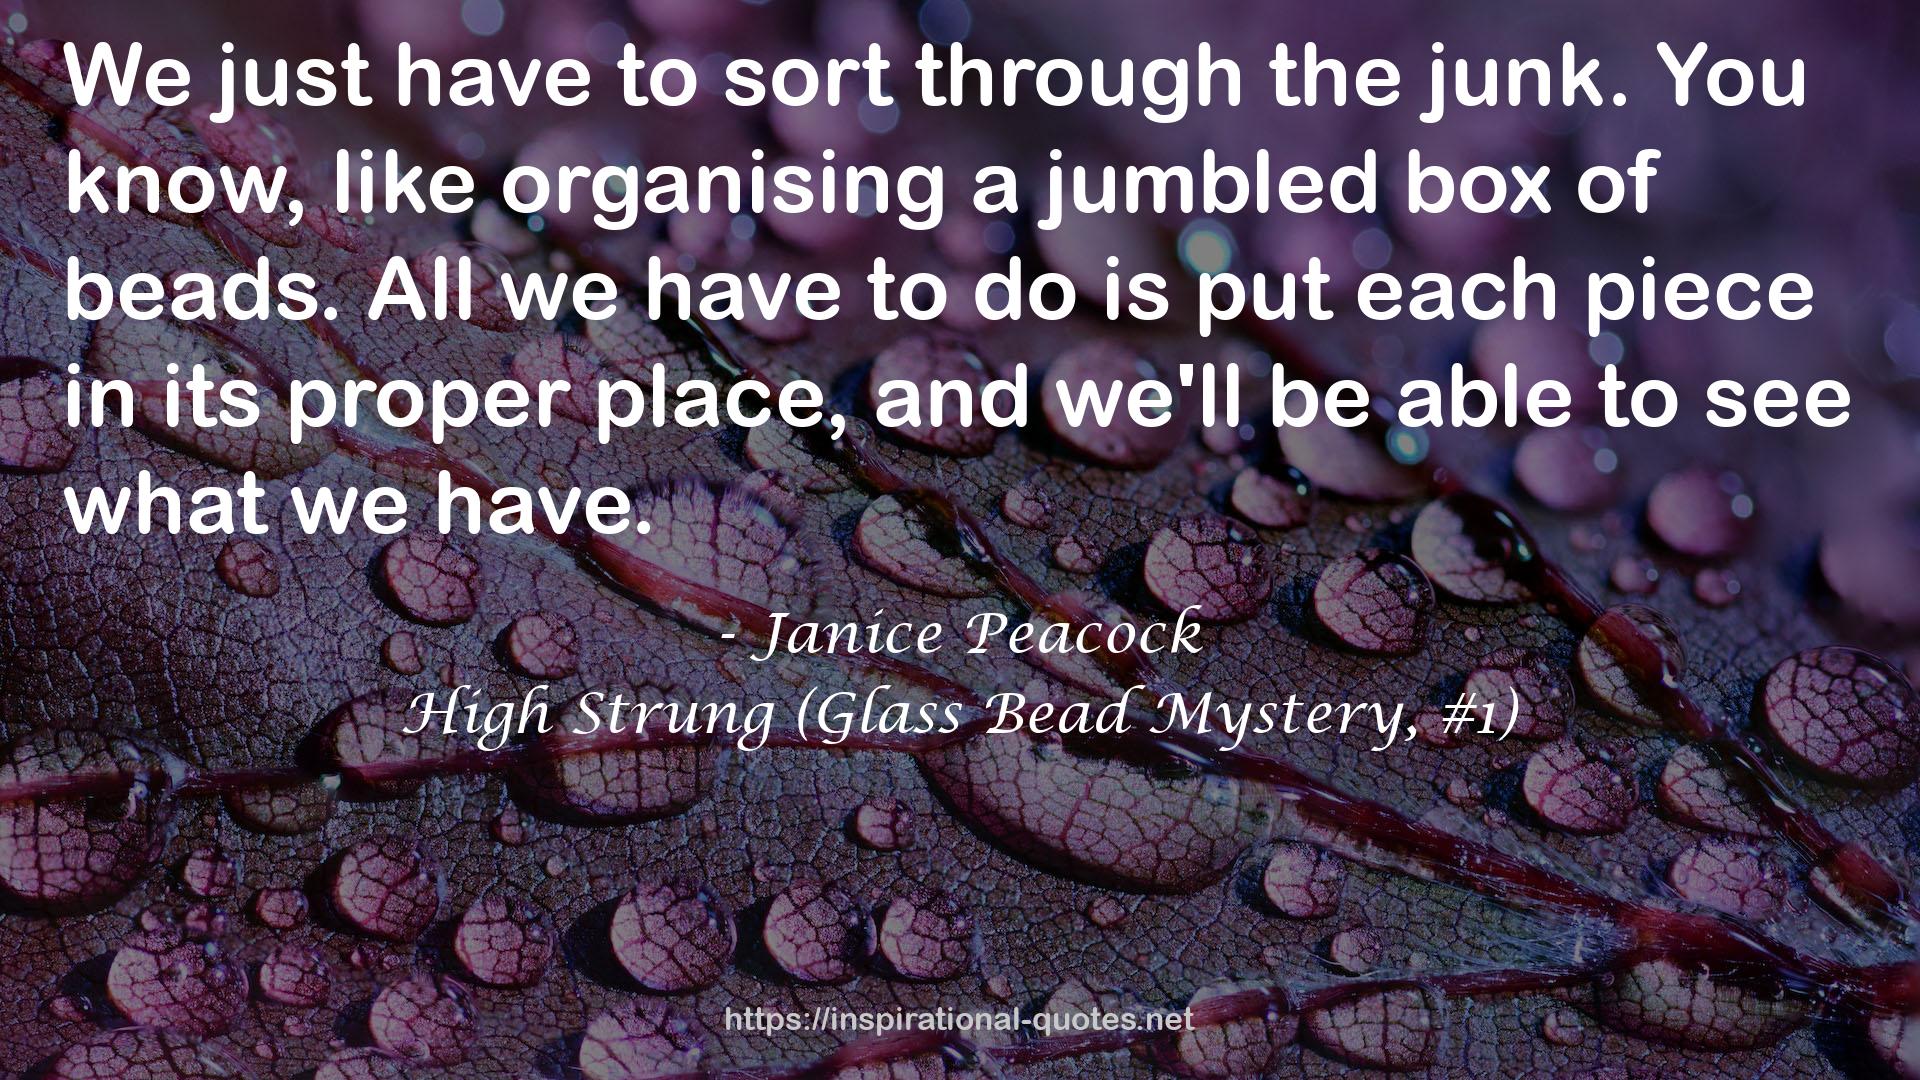 High Strung (Glass Bead Mystery, #1) QUOTES